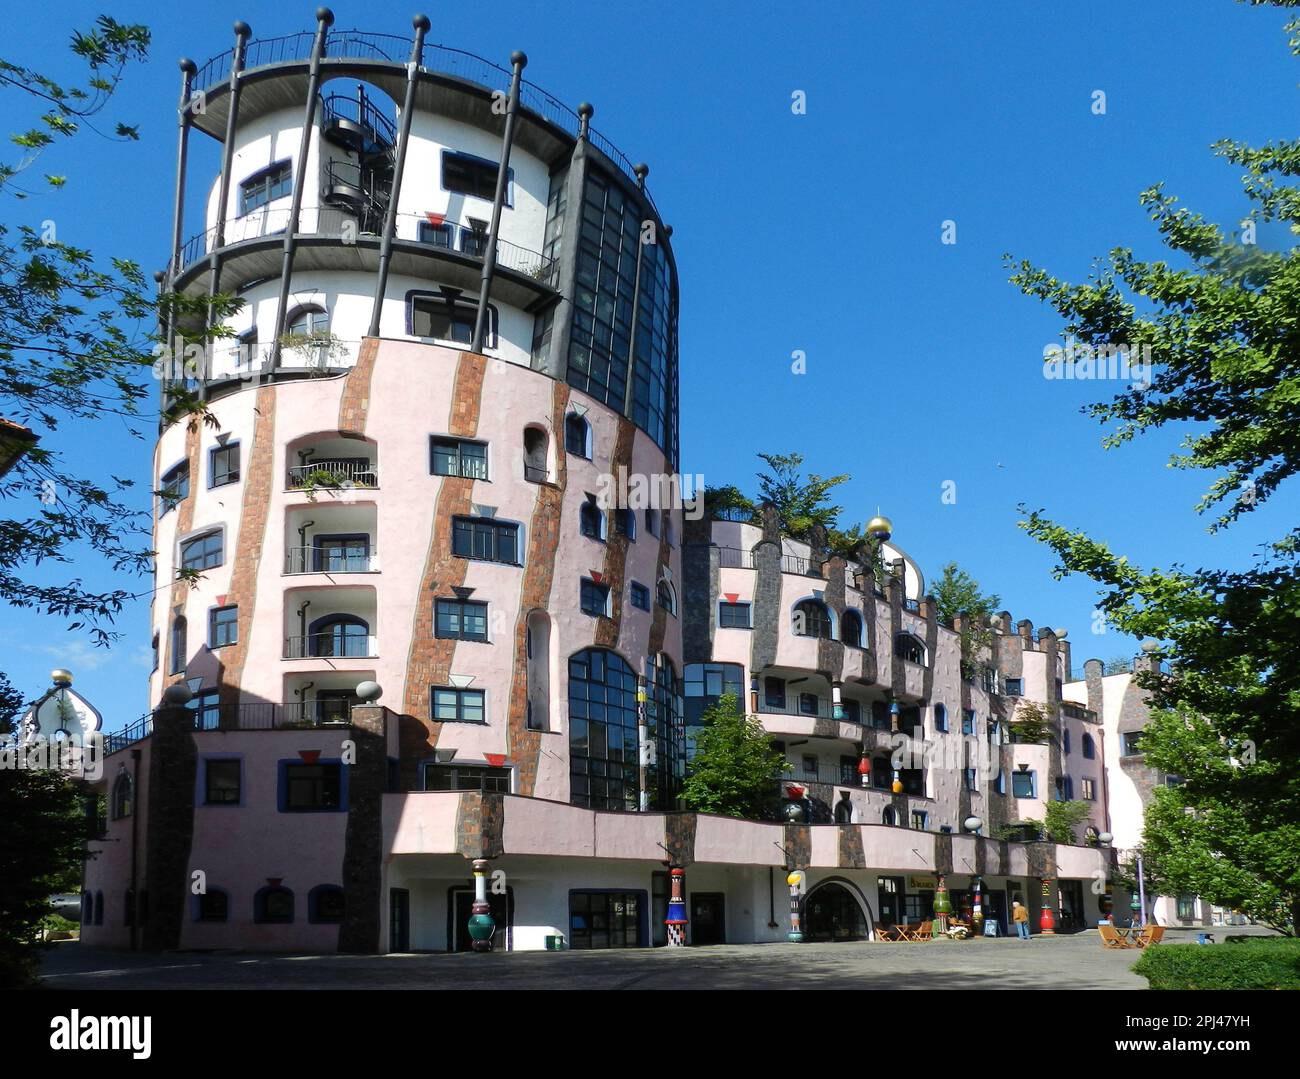 Germany, Saxony-Anhalt, Magdeburg:   the Green Citadel designed by architect Friedensreich Hundertwasser and completed in 2005. Stock Photo